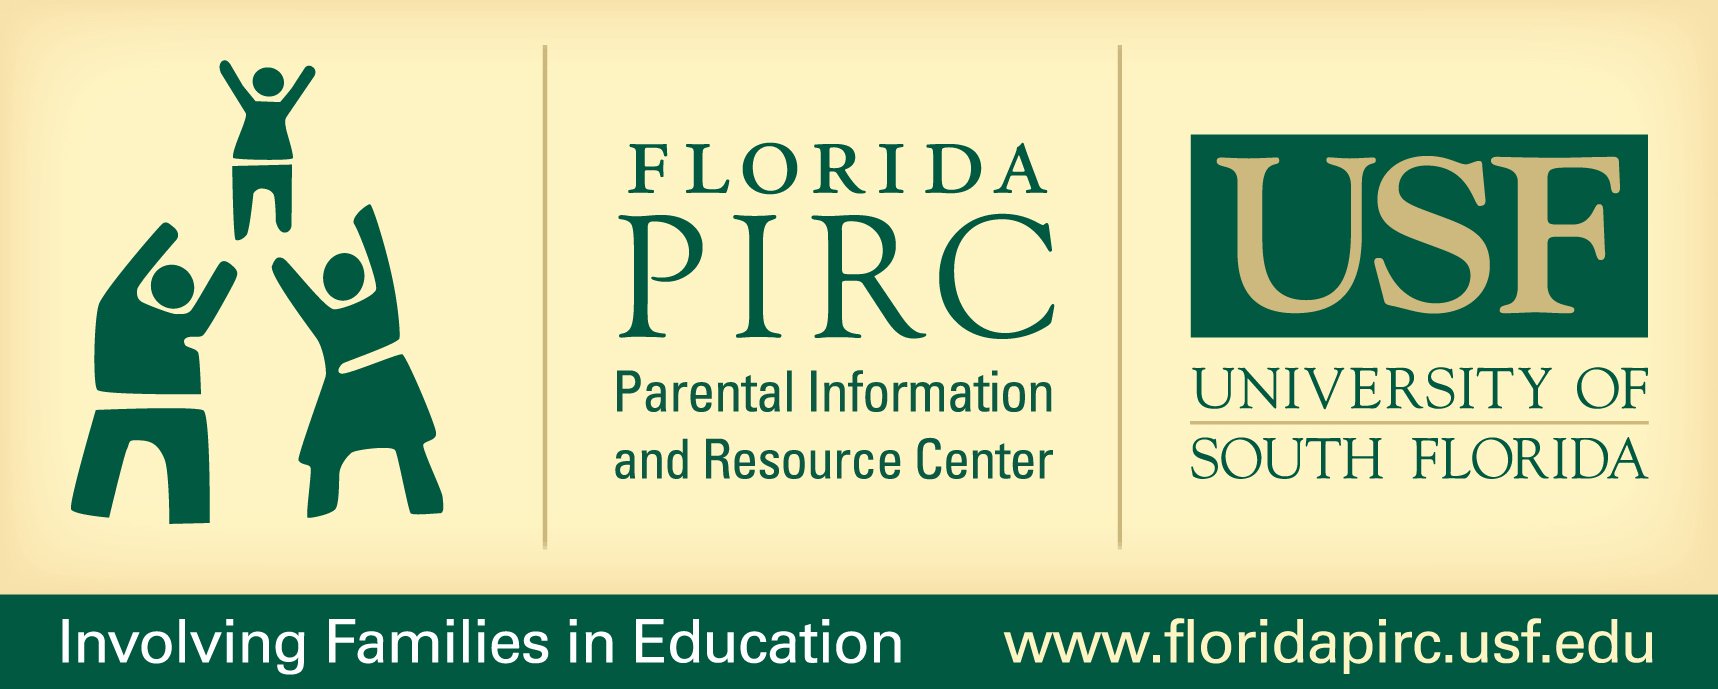  FLORIDA PIRC PARENTAL INFORMATION AND RESOURCE CENTER USF UNIVERSITY OF SOUTH FLORIDA INVOLVING FAMILIES IN EDUCATION WWW.FLORID